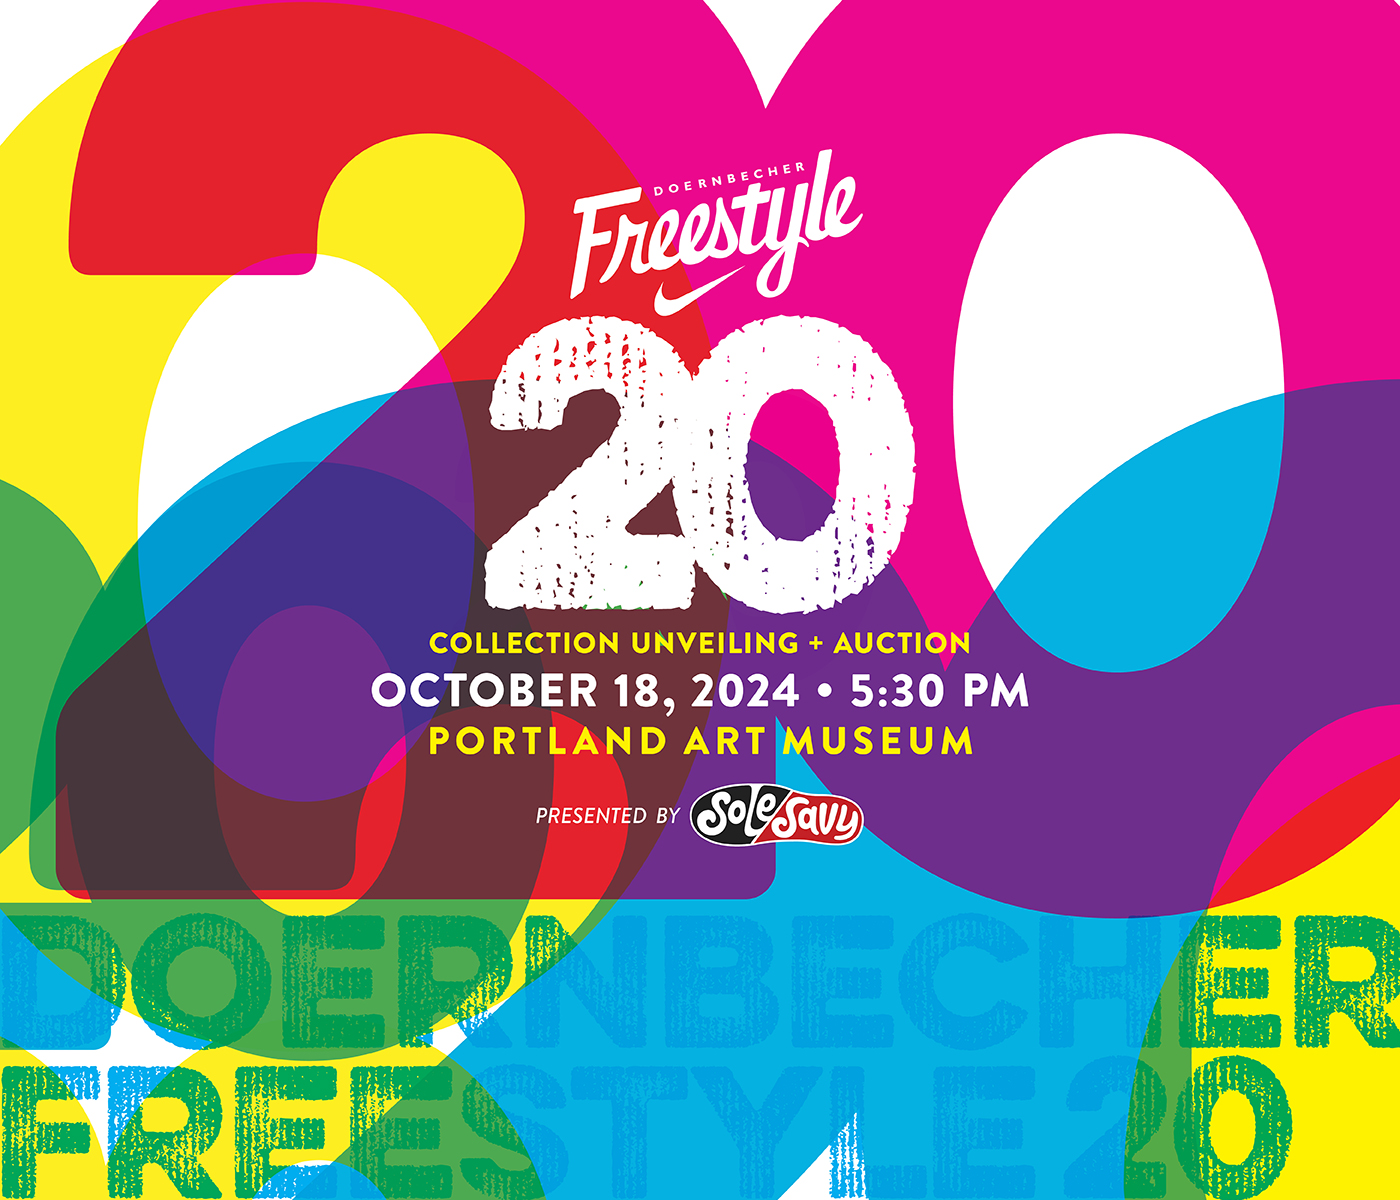 Doernbecher Freestyle 20 Unveiling and Auction